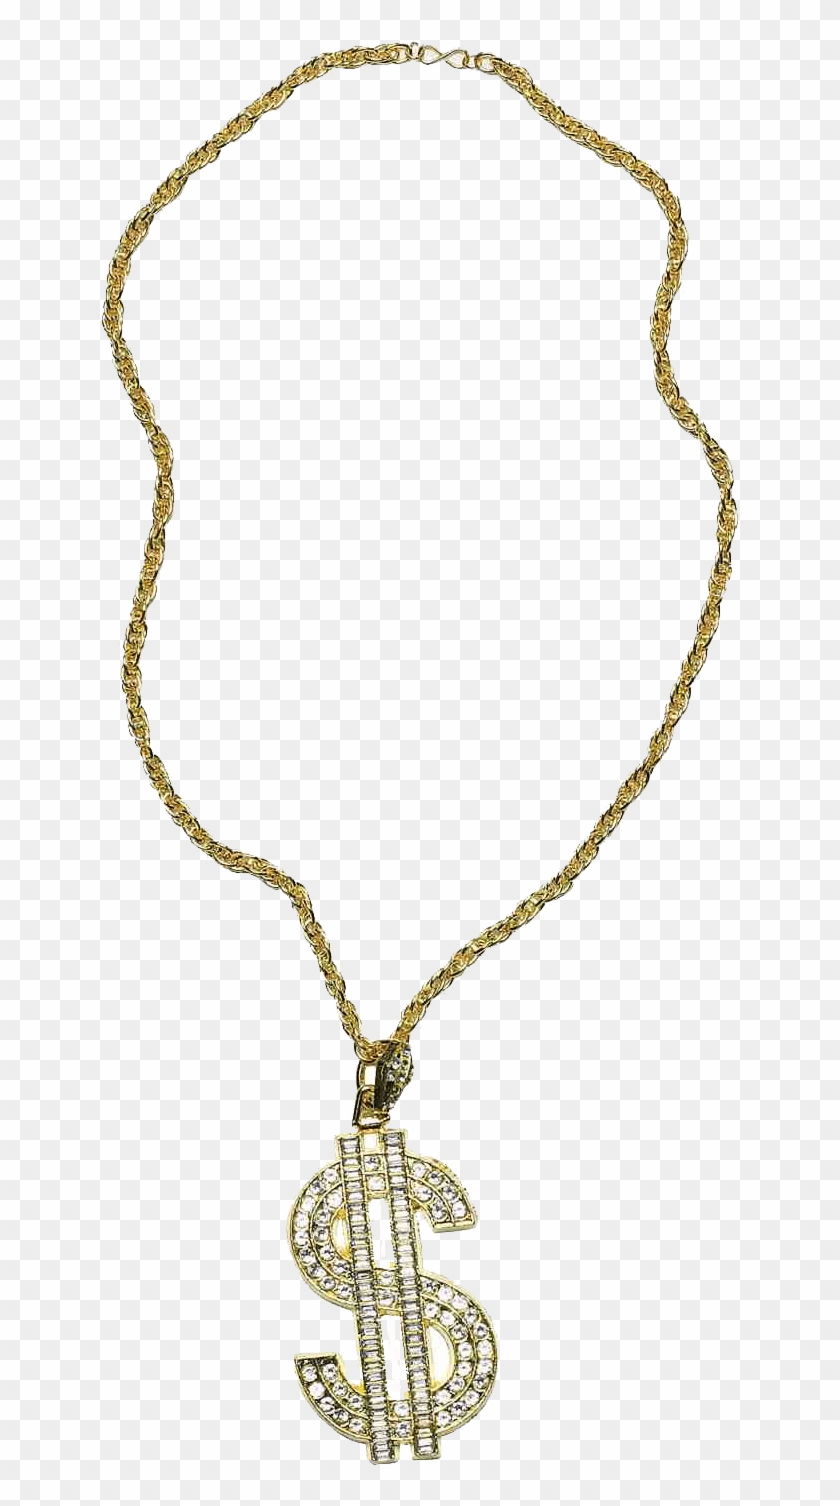 Thug Life Gold Chain Dollar Rocks Big Gold Chain Png Transparent Png 805x1500 5294 Pngfind - gold money chain roblox